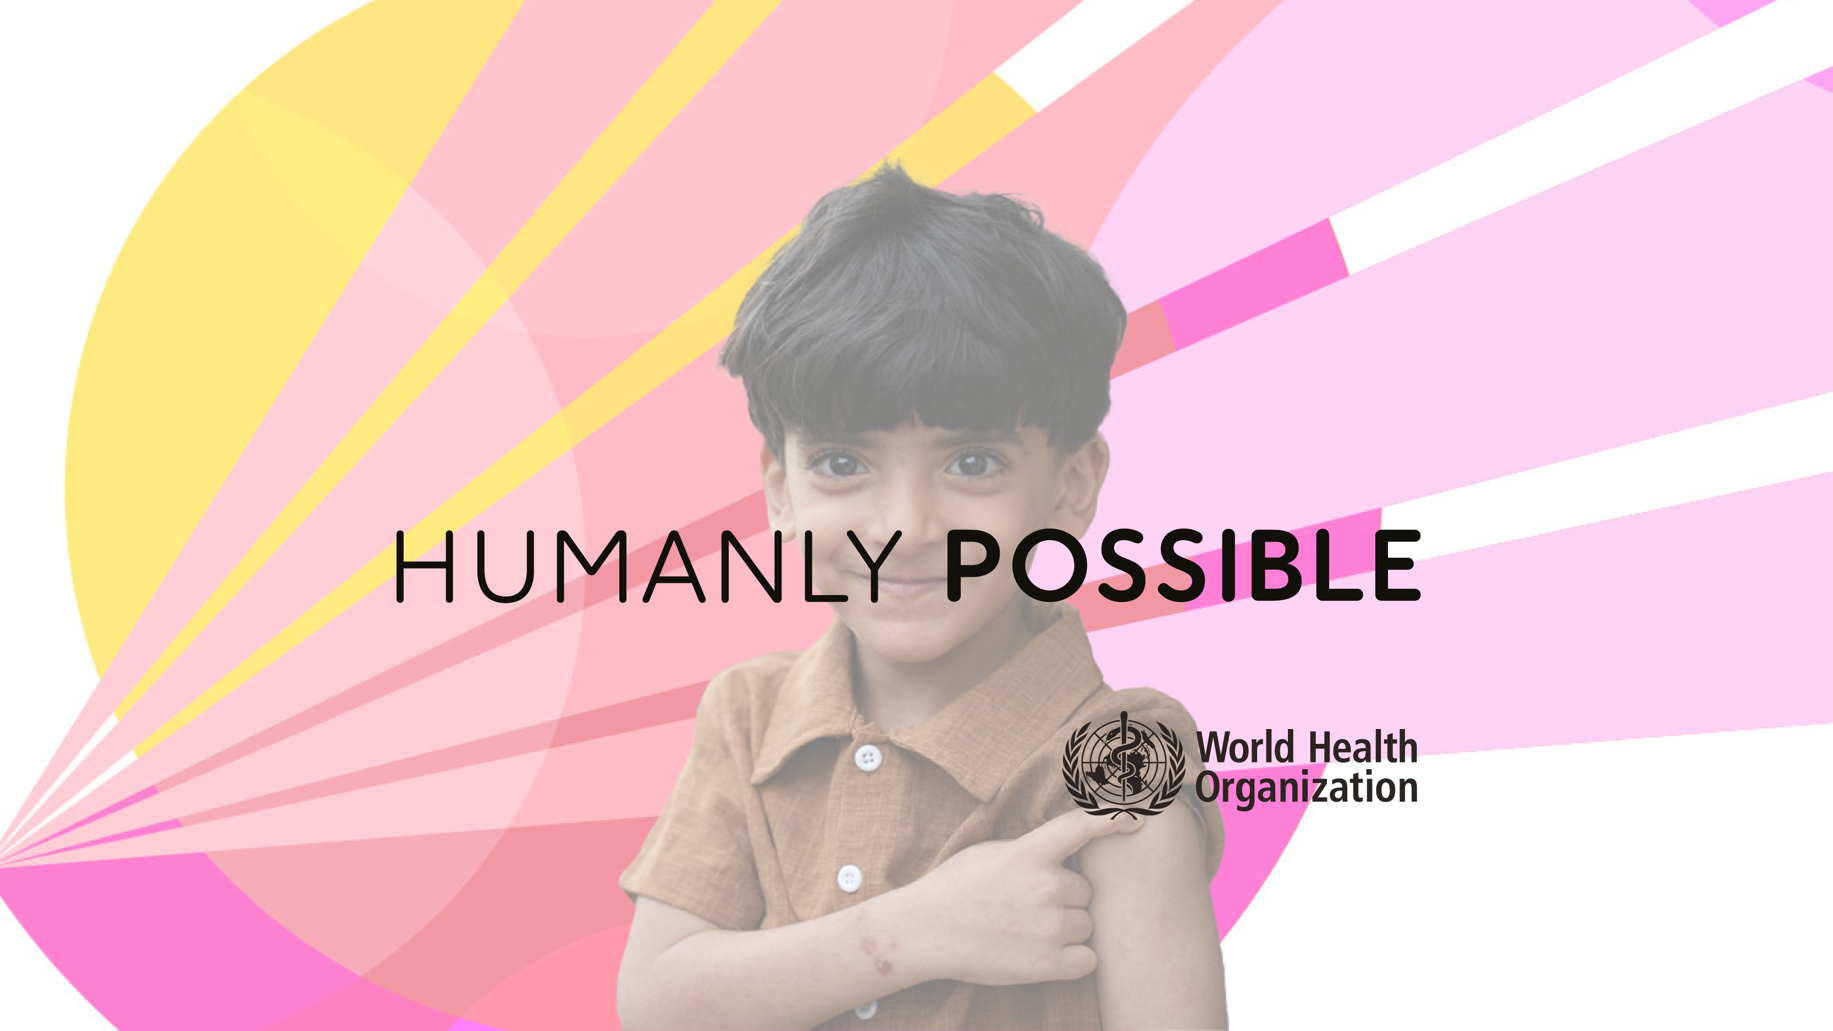 Humanly Possible: Saving lives through immunisation￼